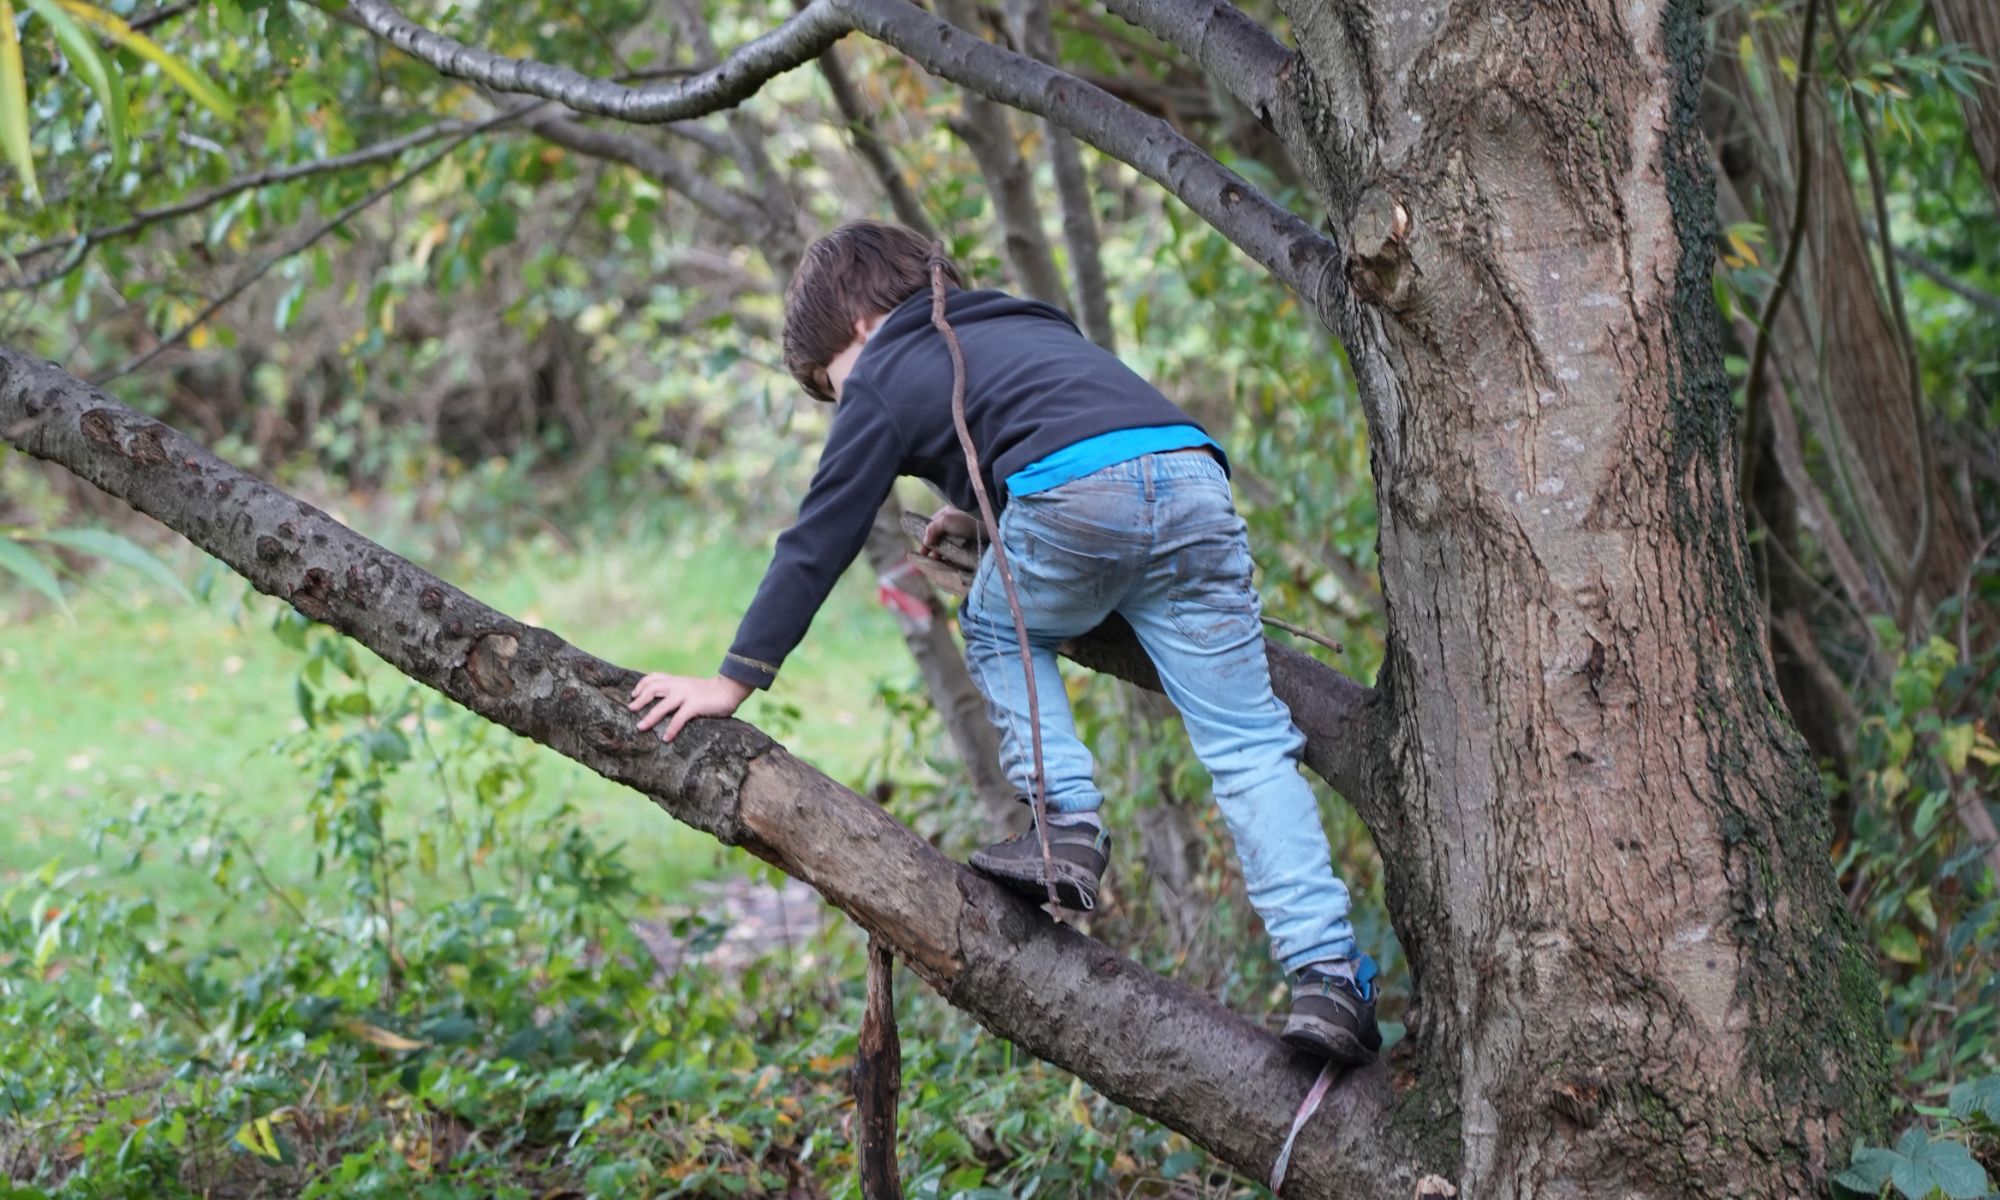 A boy climbing up the branch of a tree.